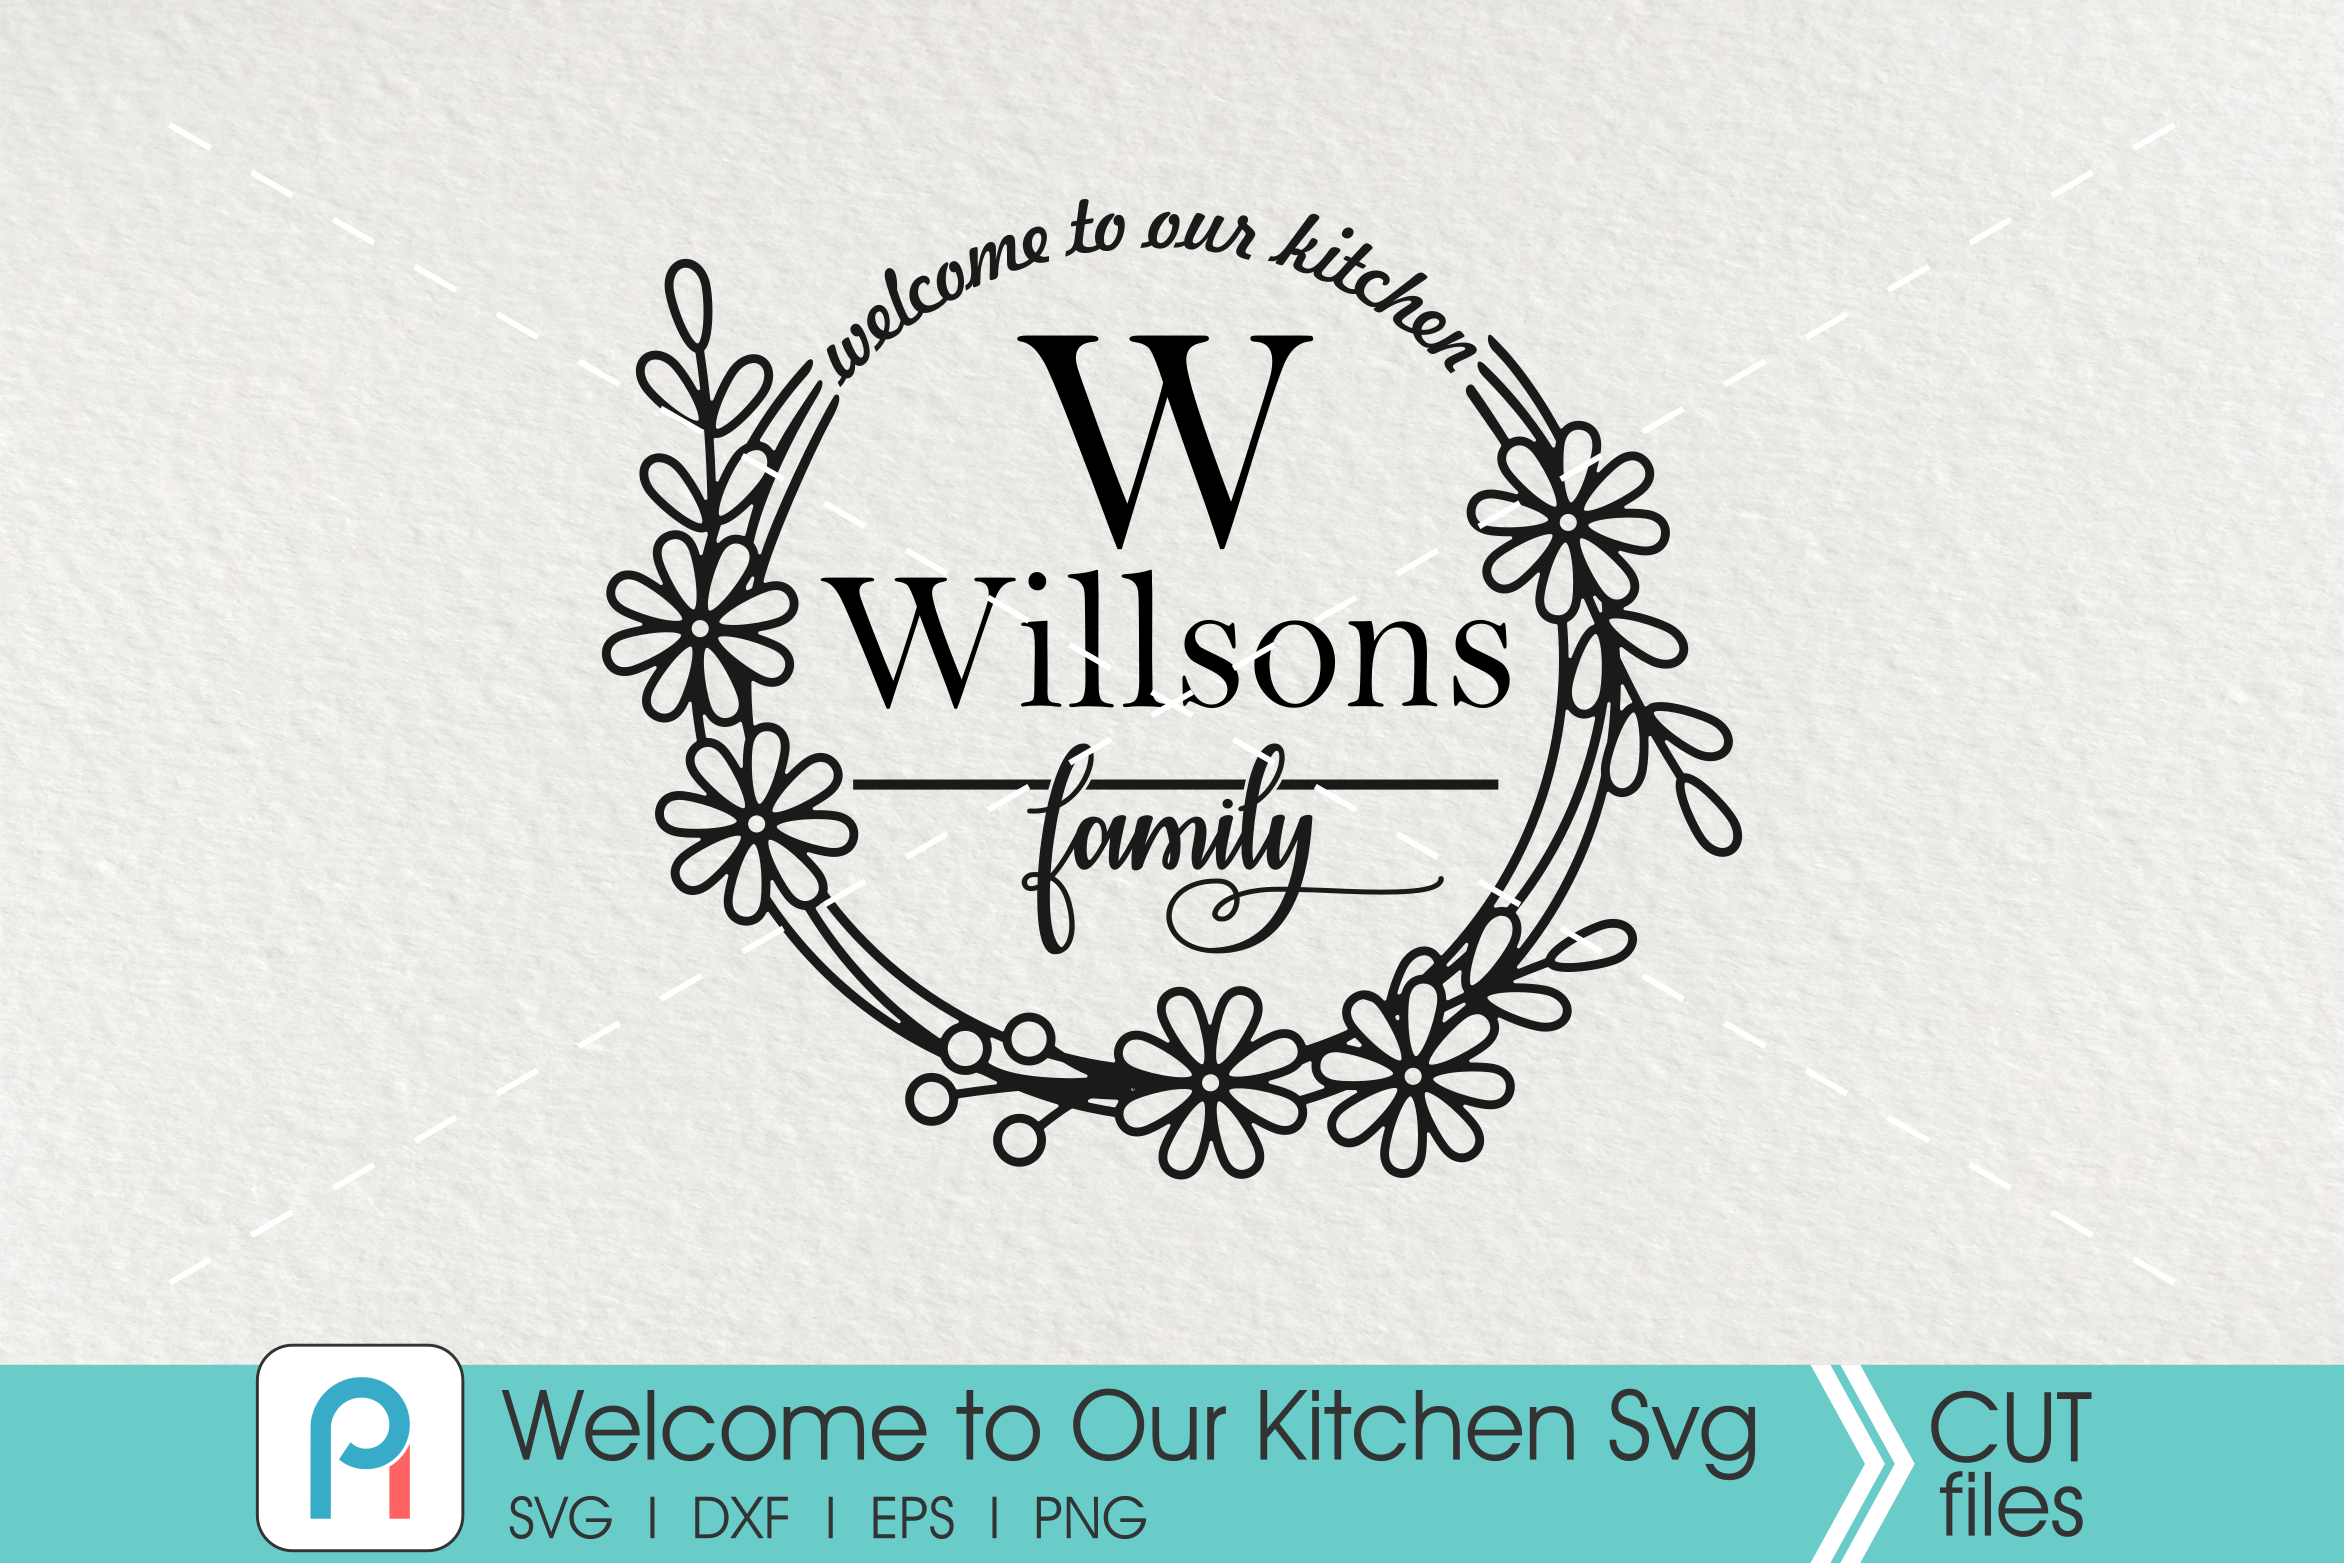 Download Welcome to Our Kitchen Svg, Kitchen Svg, Kitchen Clip Art By Pinoyart | TheHungryJPEG.com